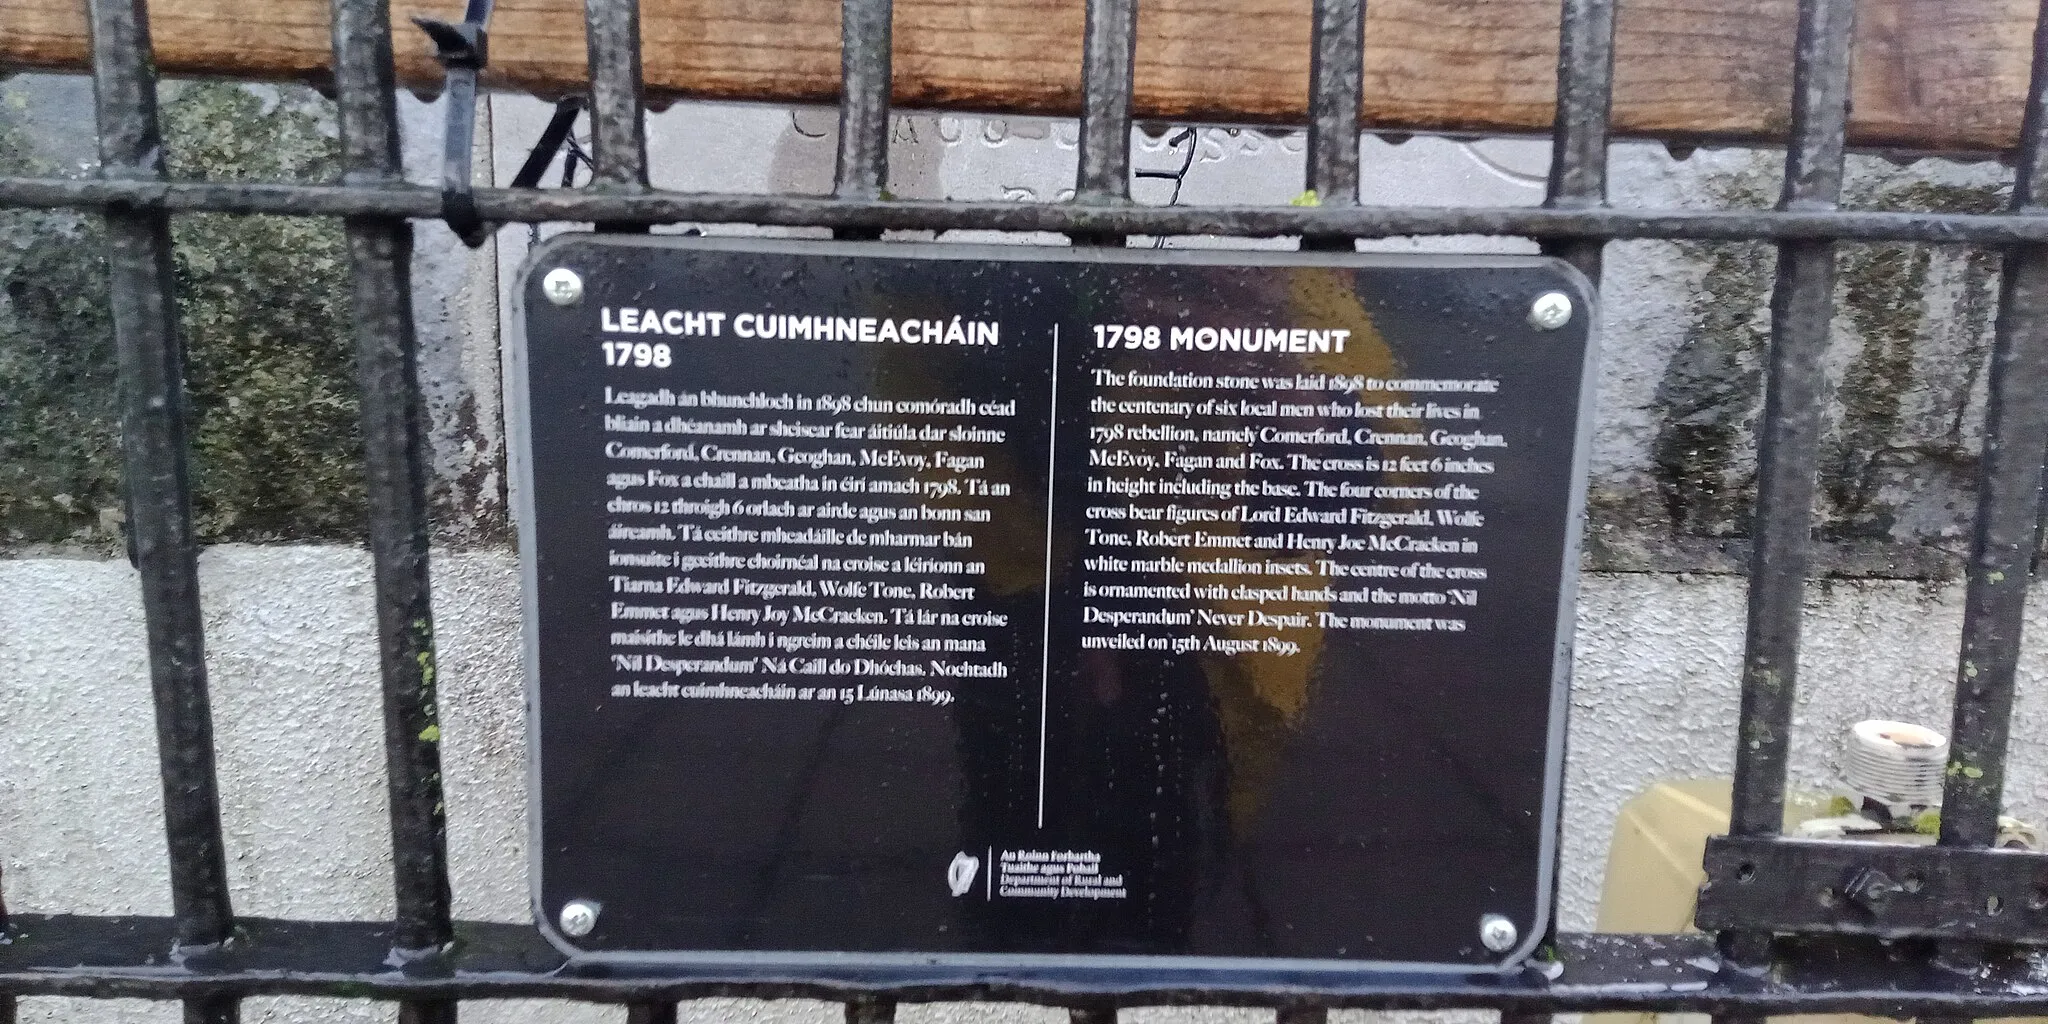 Photo showing: bilingual sign on the 1798 Monument in Ballinakill. The English text reads "1798 monument. The foundation stone was laid 1898 to commemorate the centenary of six local men who lost their lives in 1798 rebellion, namely Comerford, Grennan, Geoghan, McEvoy, Fagan and Fox. The cross is 12 feet 6 inches in height including the base. The four corners of the cross bear figures of Lord Edward Fitzgerald, Wolfe Tone, Robert Emmet and Henry Joe McCracken in white marble medallion inlets. The centre of the cross is ornamented with clasped hands and the motto "Nil Desperandum" Never Despair. The monument was unveiled on 15th August 1899."